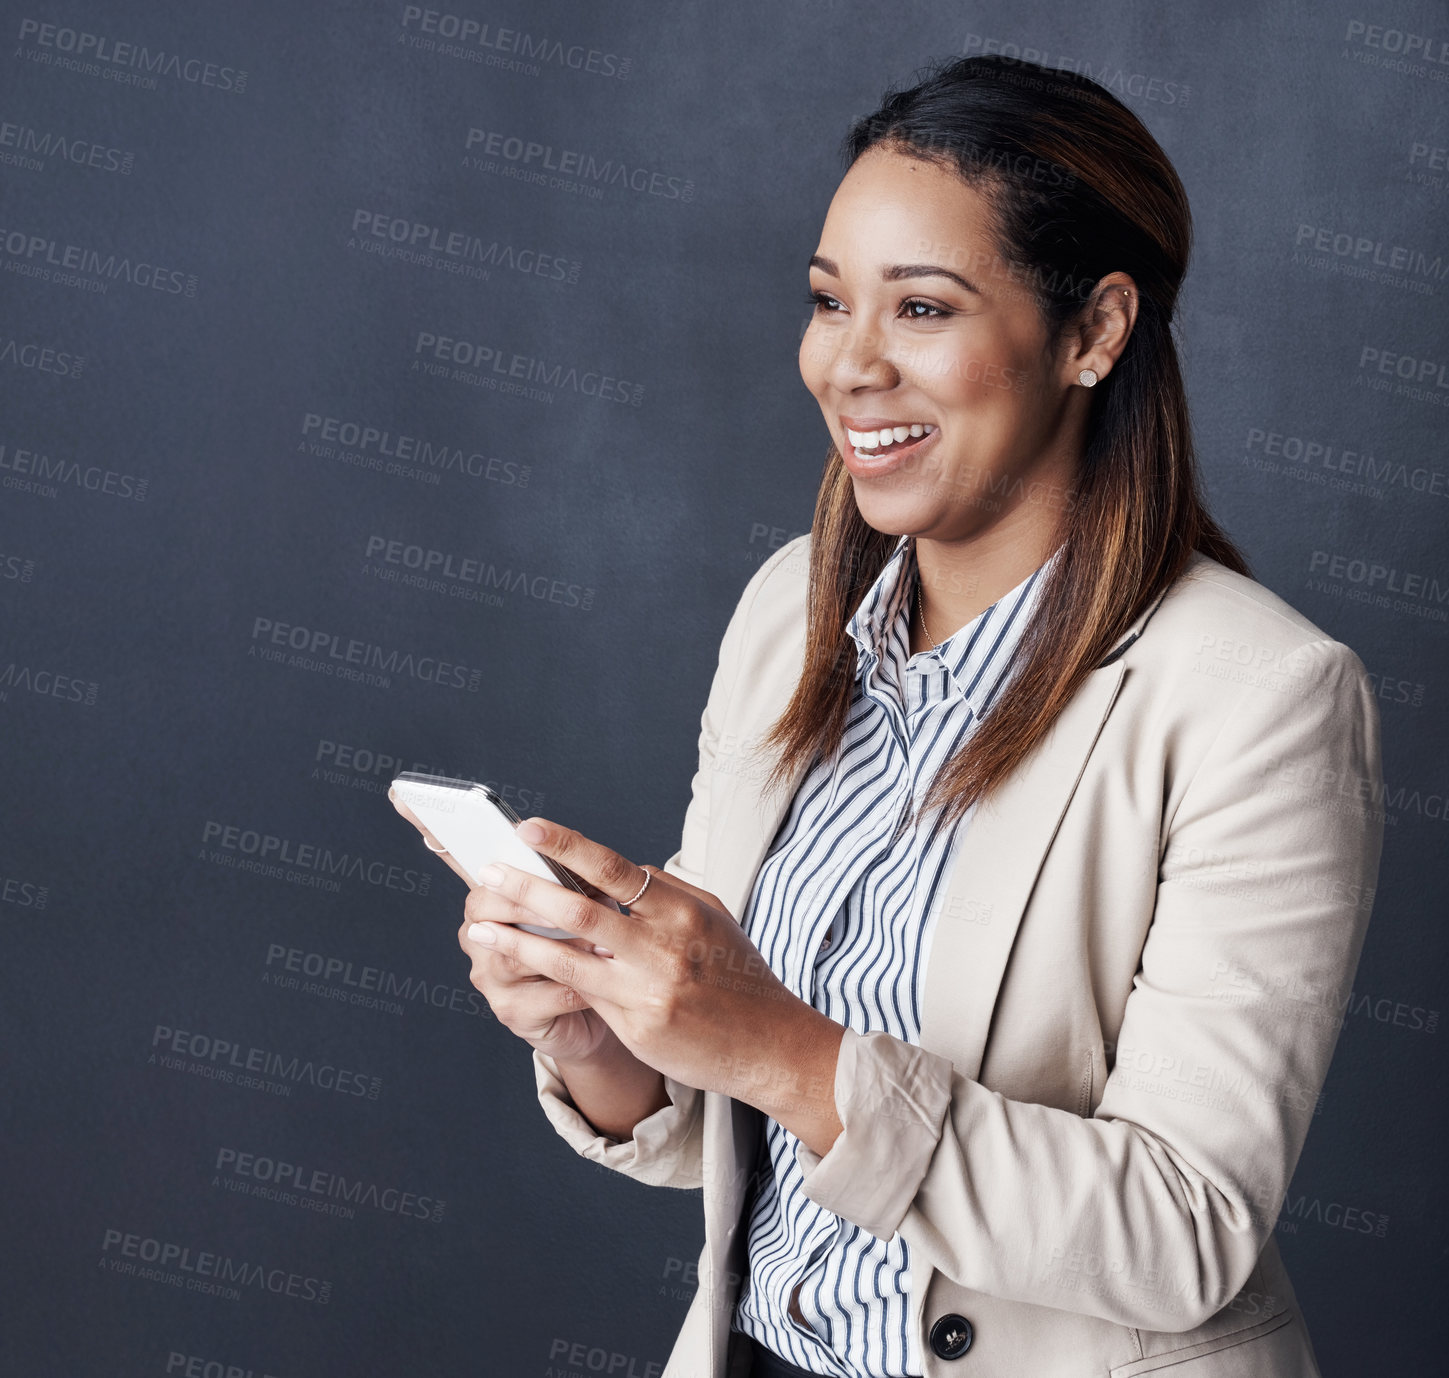 Buy stock photo Studio shot of a young businesswoman using her cellphone against a grey background